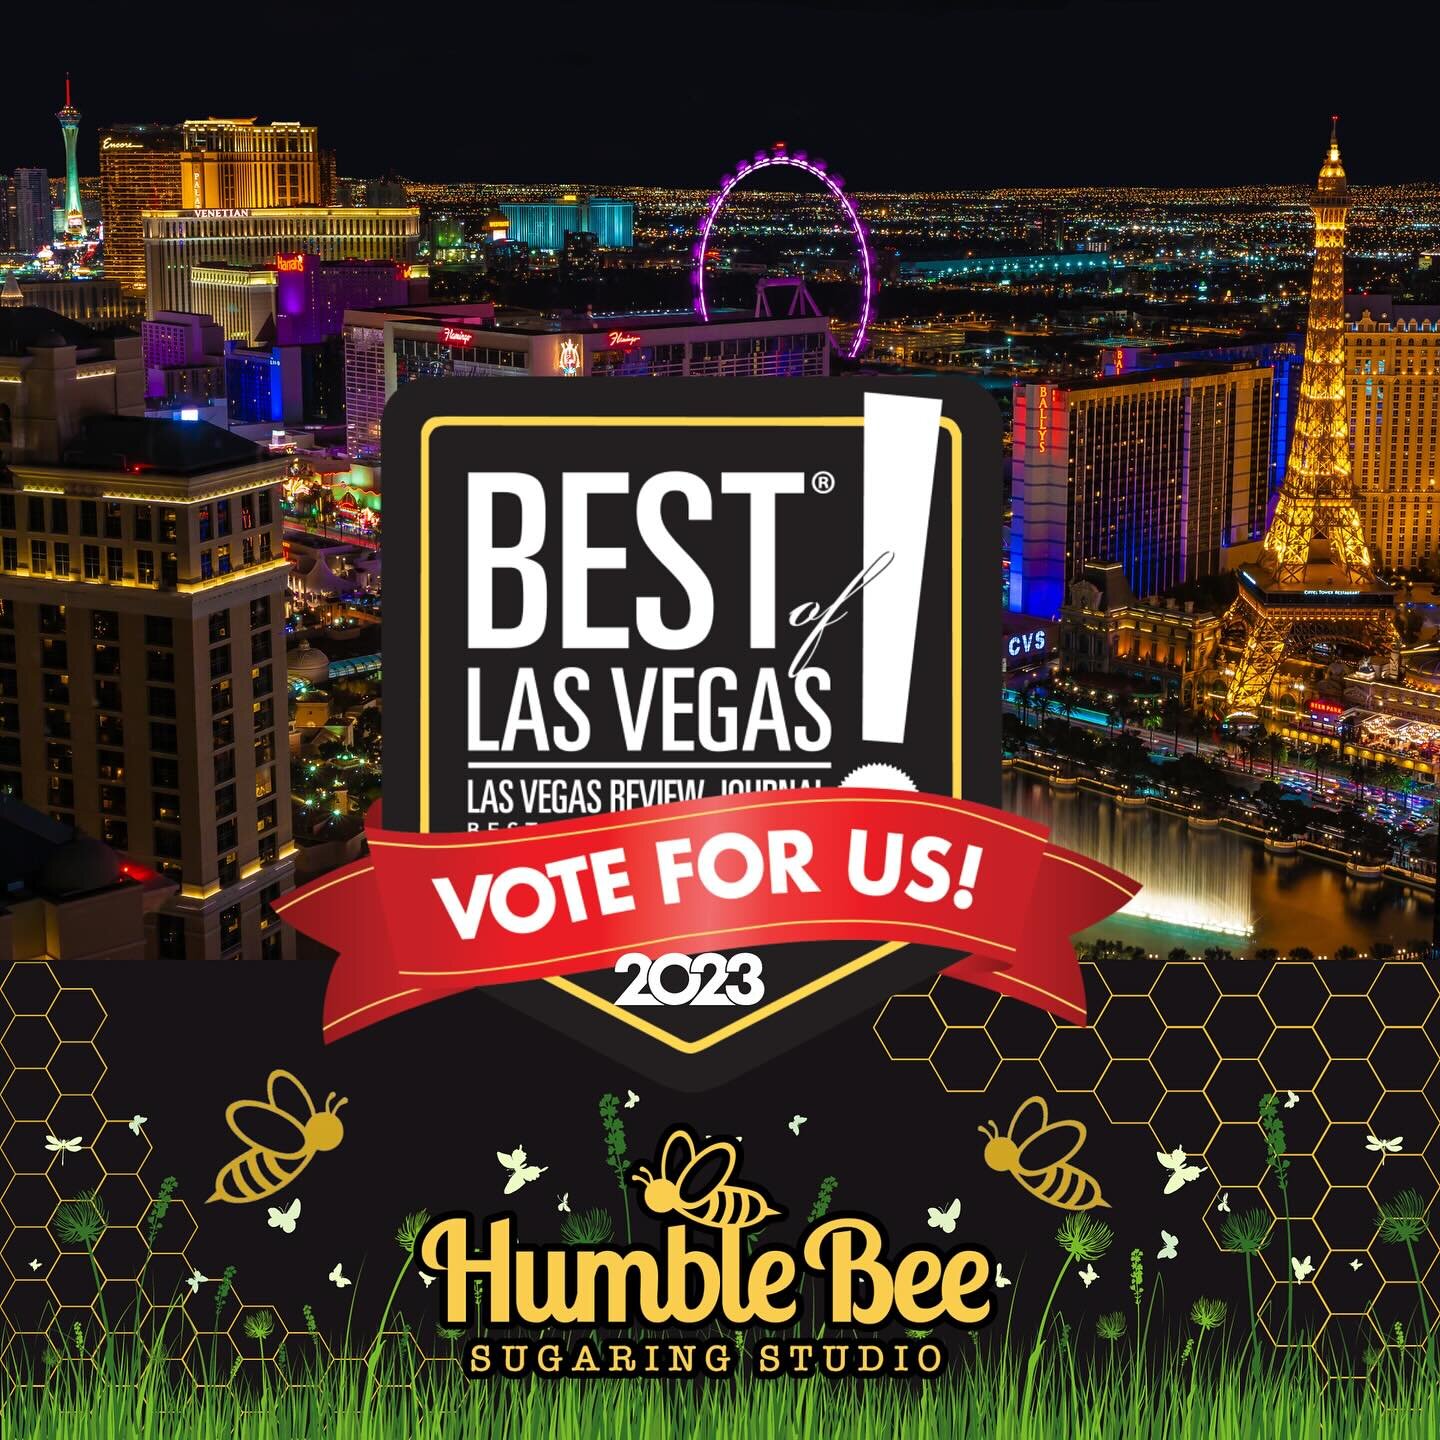 Last year, you voted us into being awarded Best of Las Vegas Gold Winner 🥇 and we will forever be grateful&nbsp;💛&nbsp;

Please help our Hive get this honor once more! 🐝

Voting ends on Thursday and you can vote once a day if you are able to 😊 &n